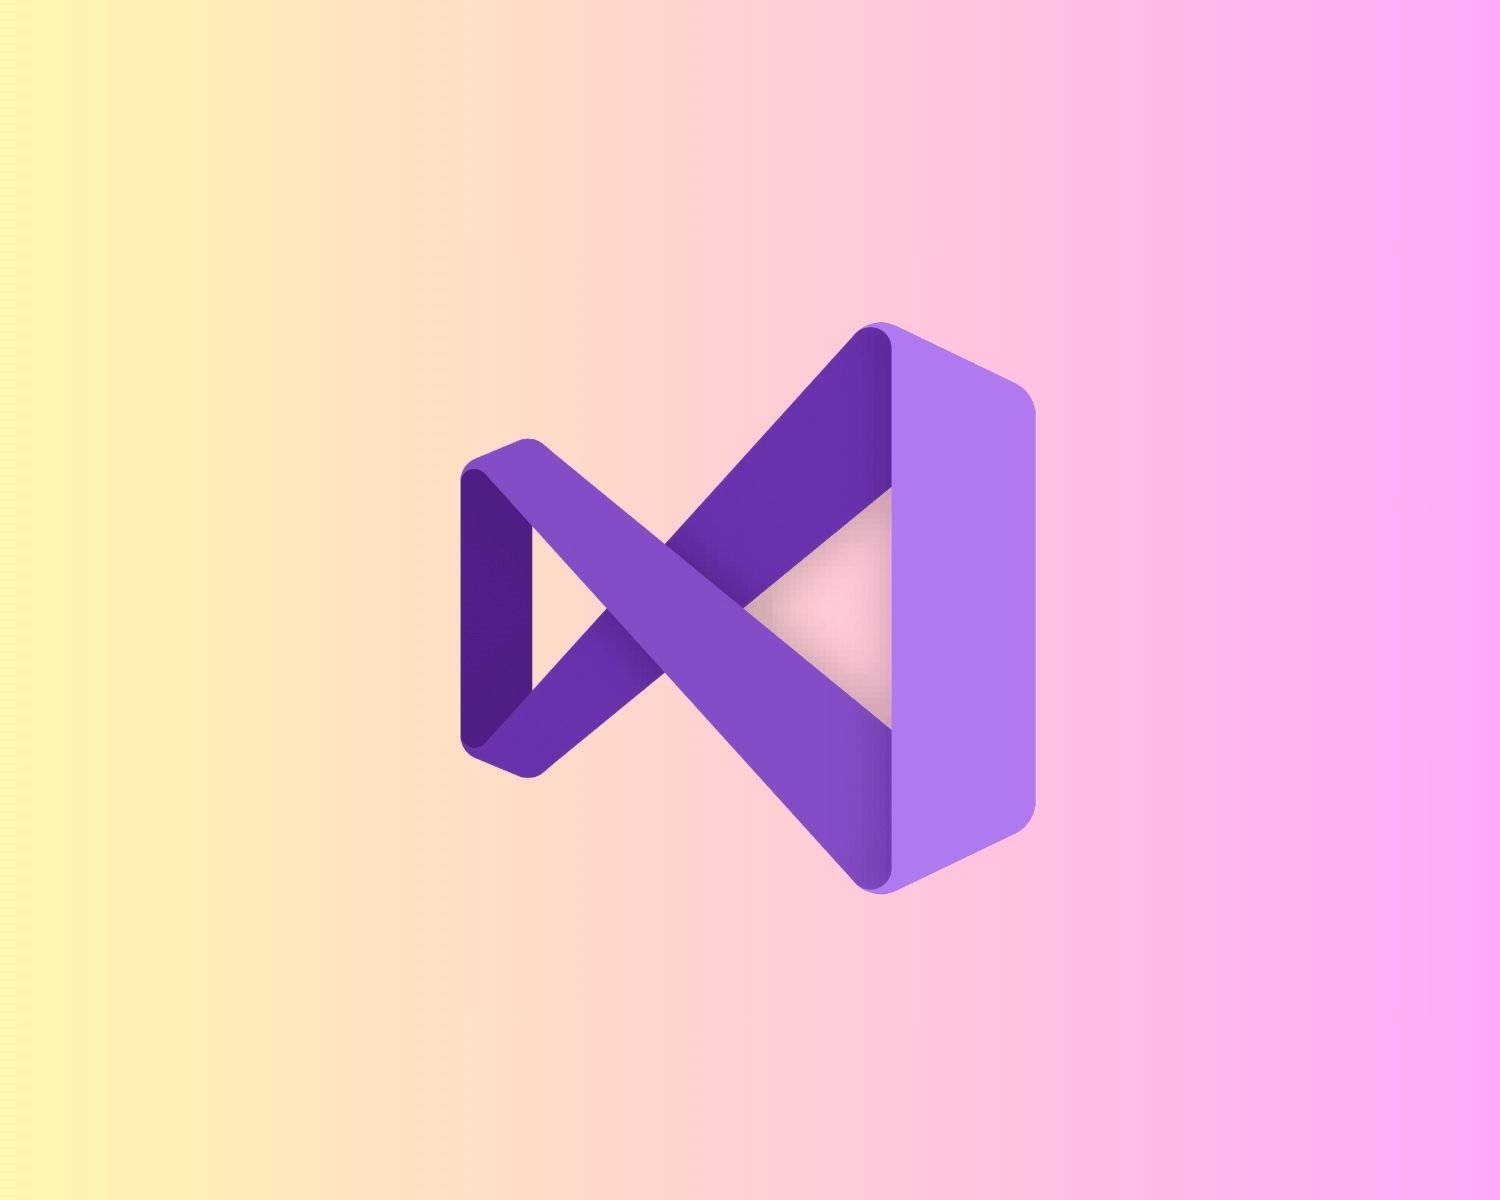 Visual Studio 2019 Vs Online Compilers: The Mystery Of The Ambiguous 'cout'